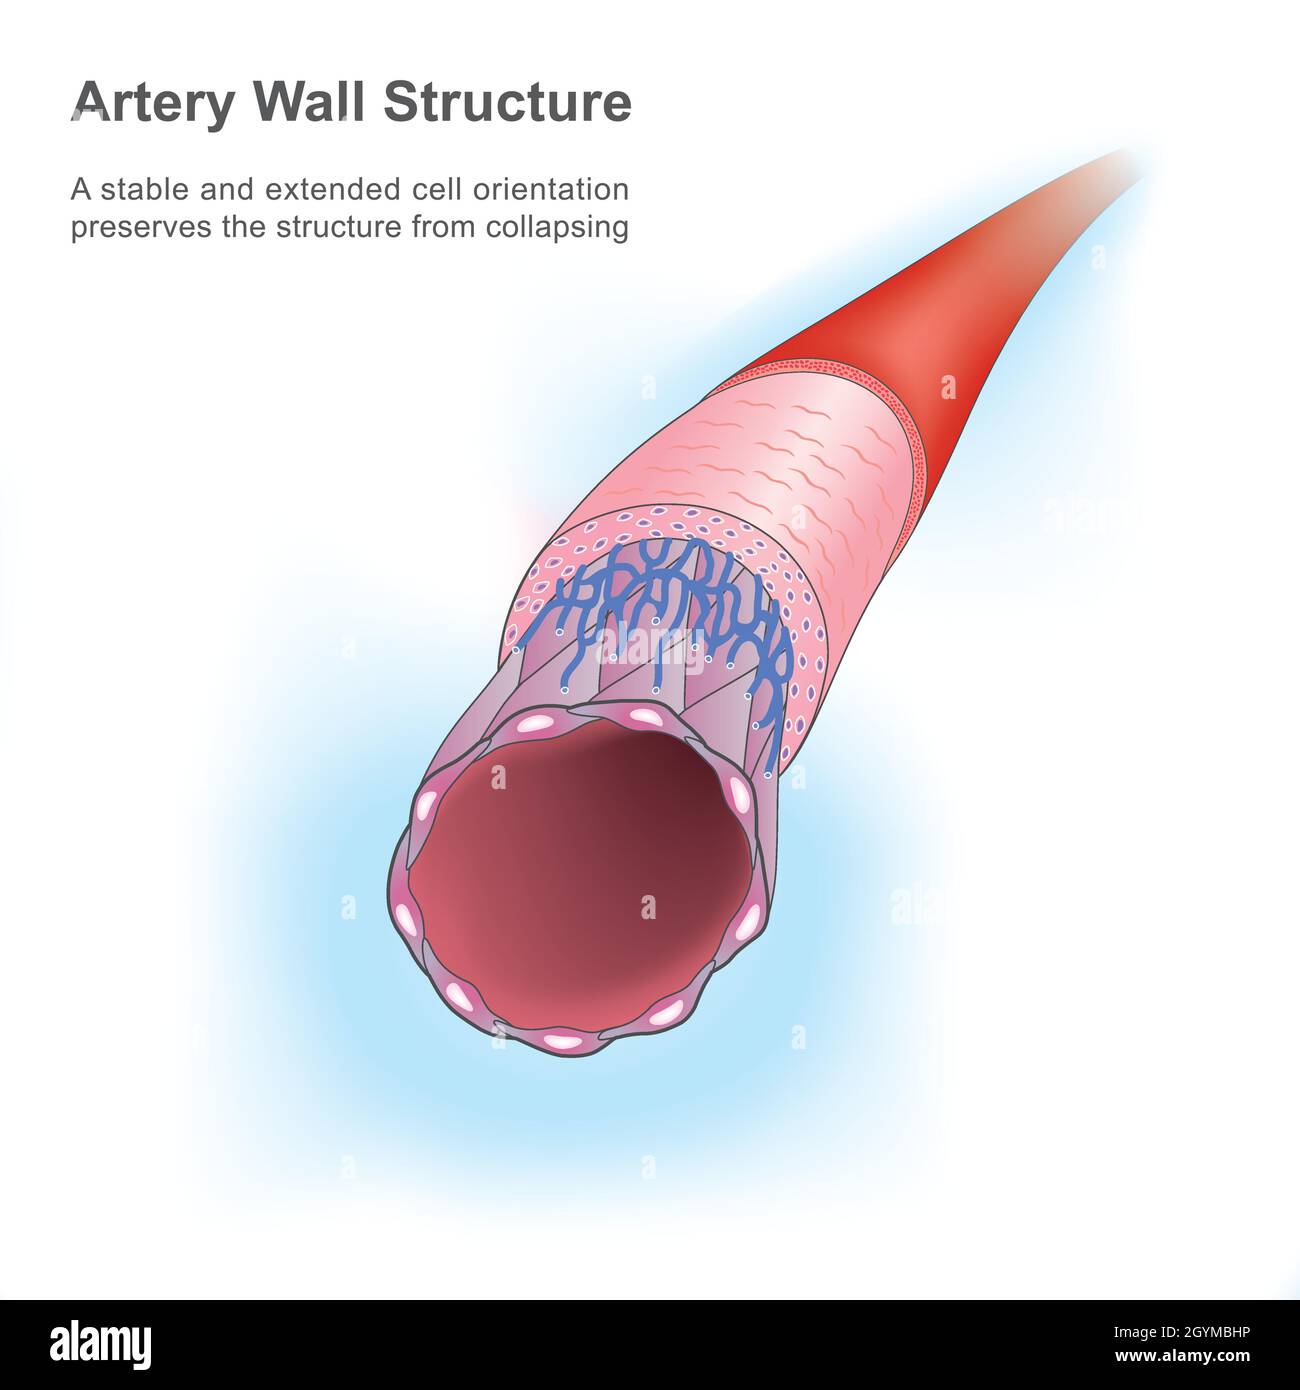 Artery Wall Structure. This figure showing a human artery in explain stable and extended endothelial cell. Stock Vector